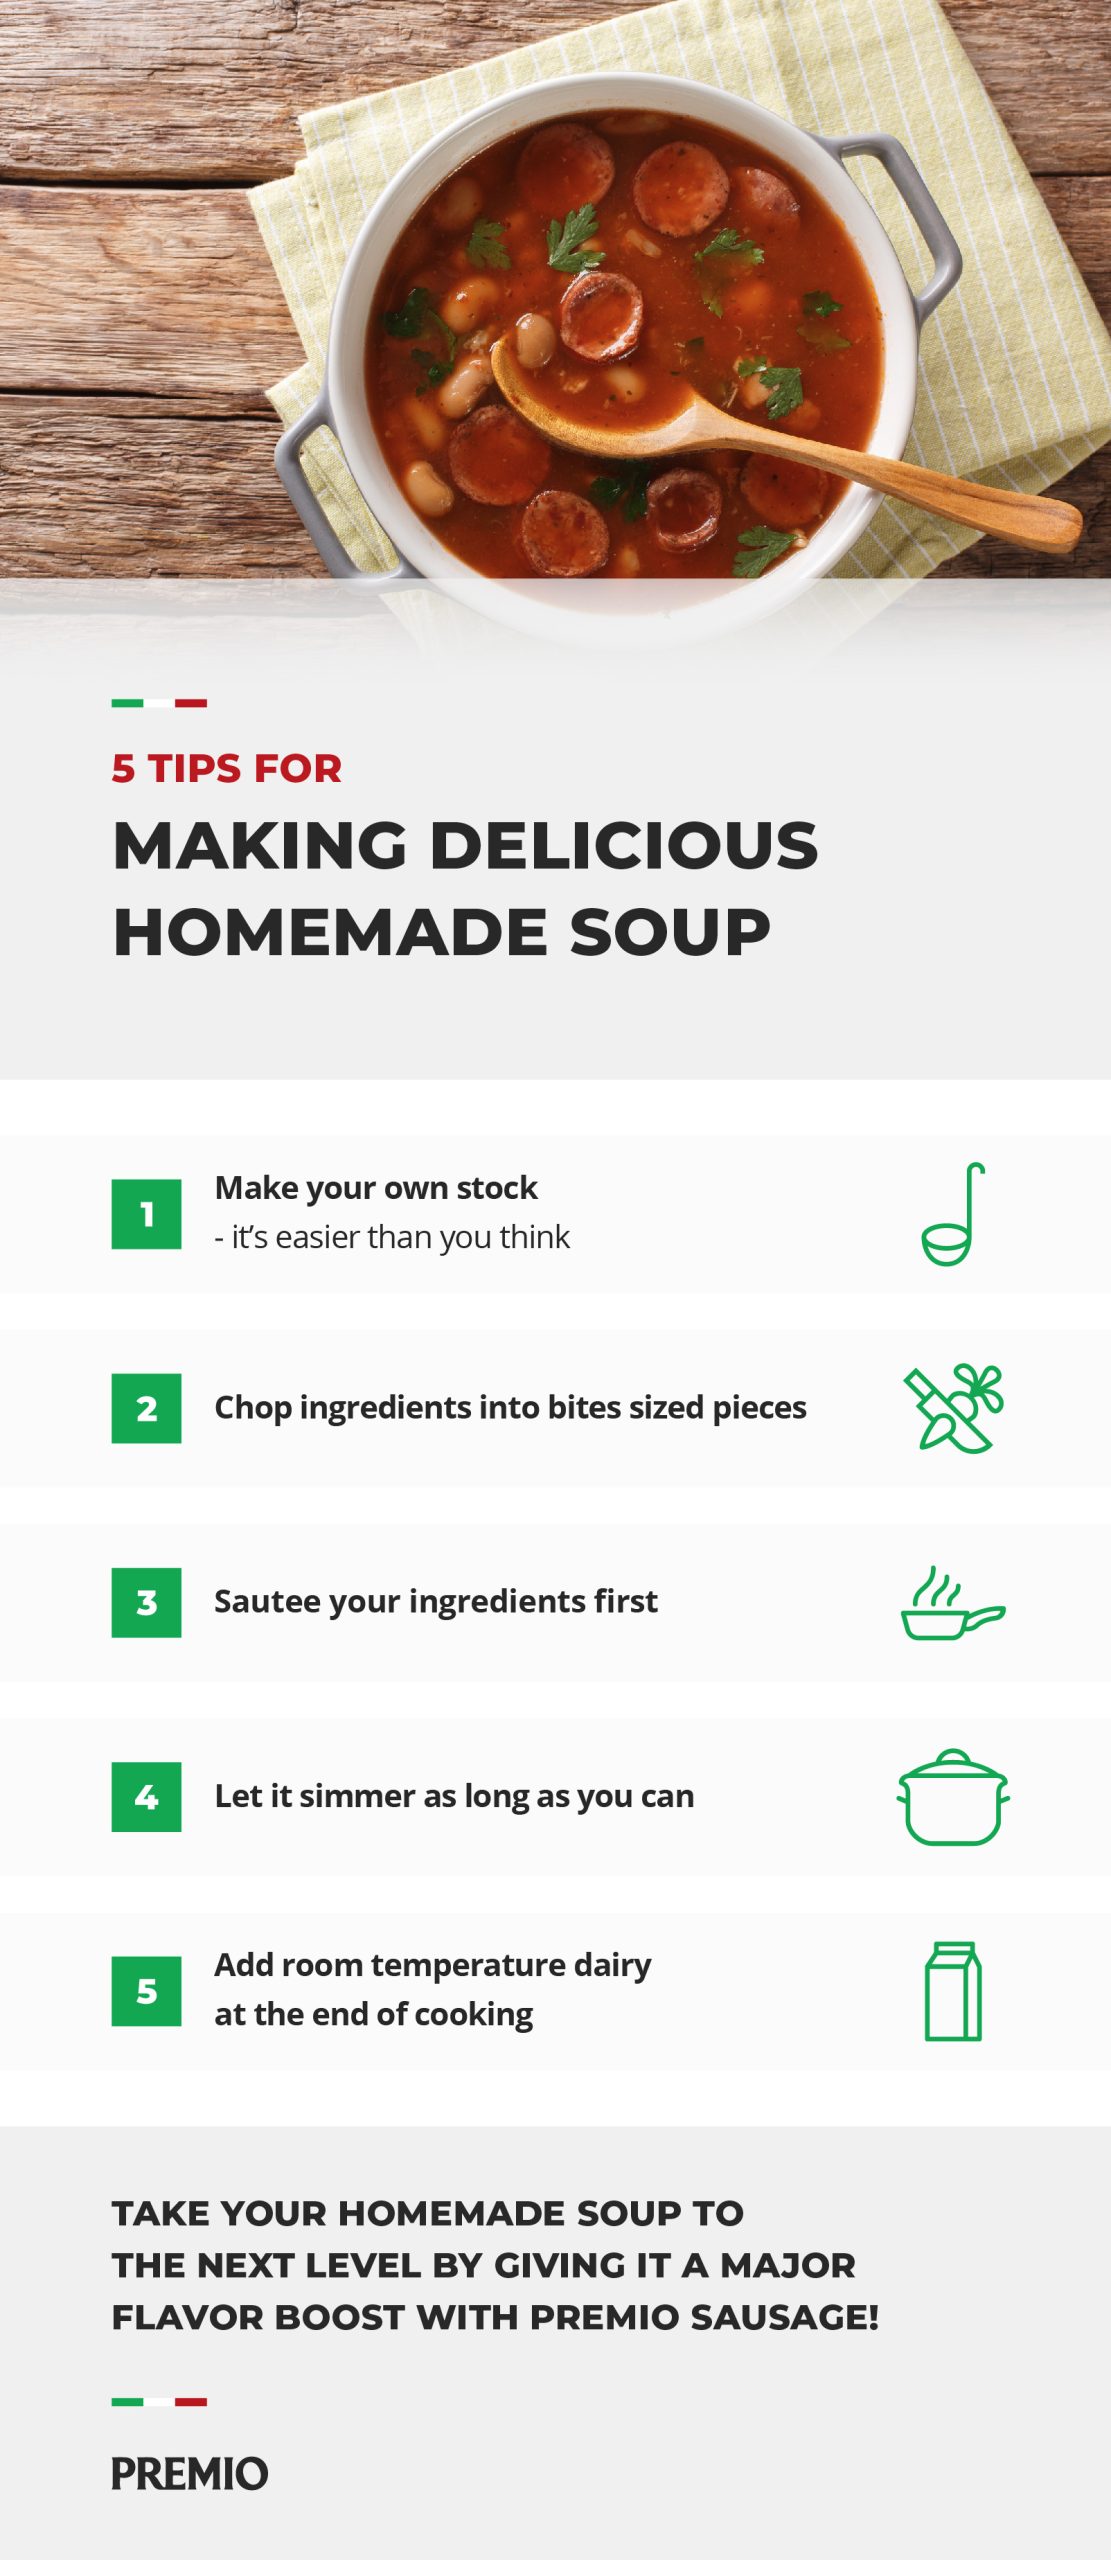 5 tips for making delicious homeade soups